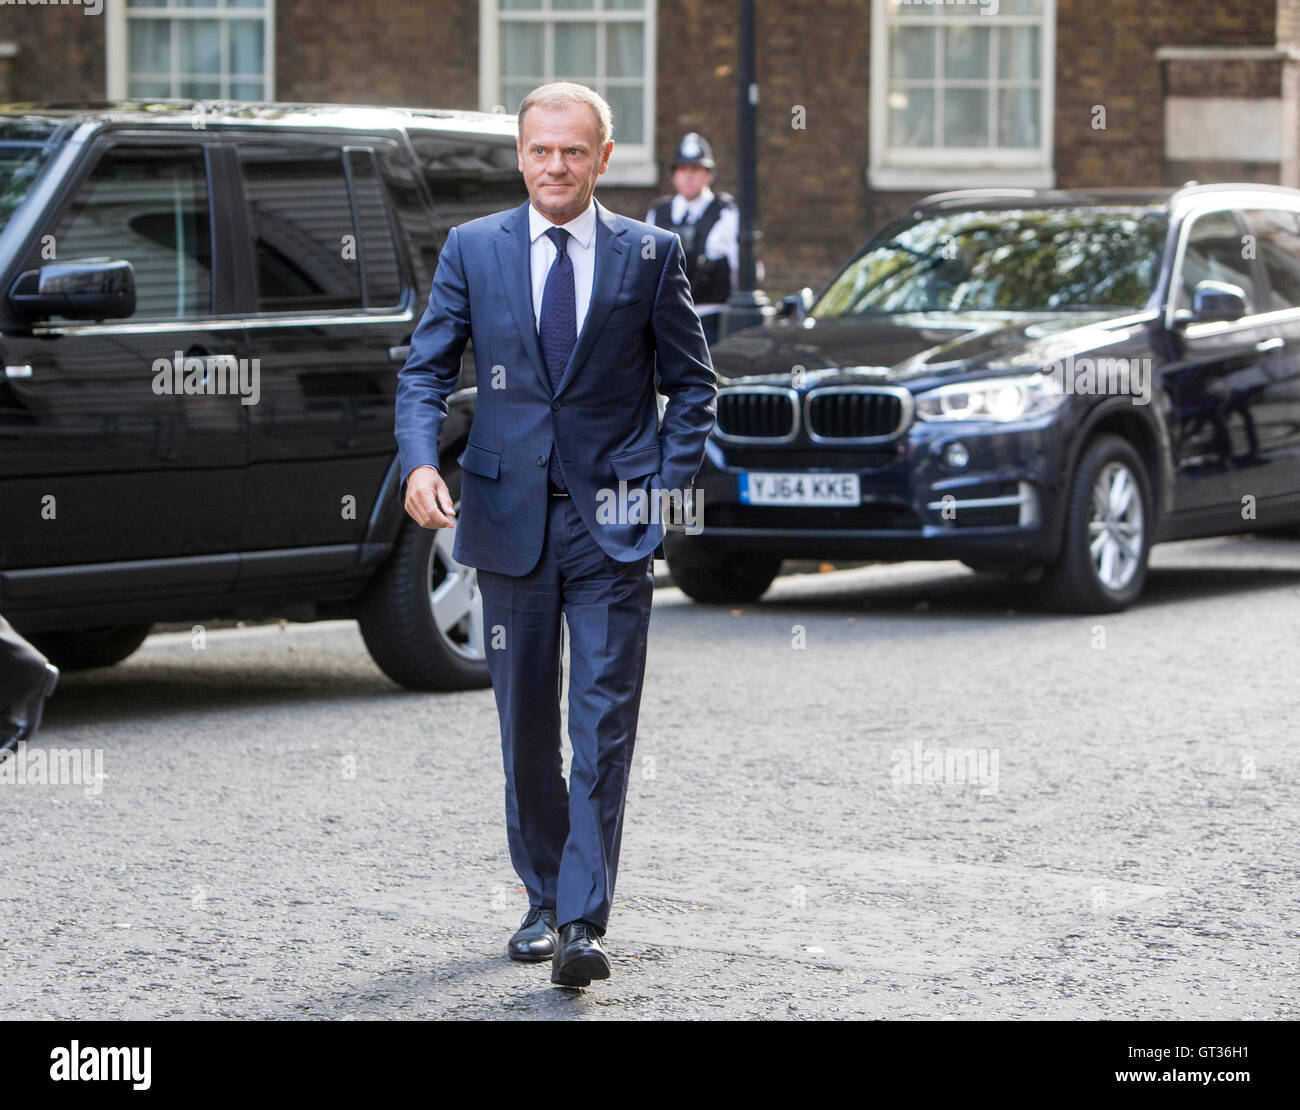 Donald Tusk,President of the European Council since 1 December 2014,arrives at 10 Downing Street to have talks with Theresa May Stock Photo